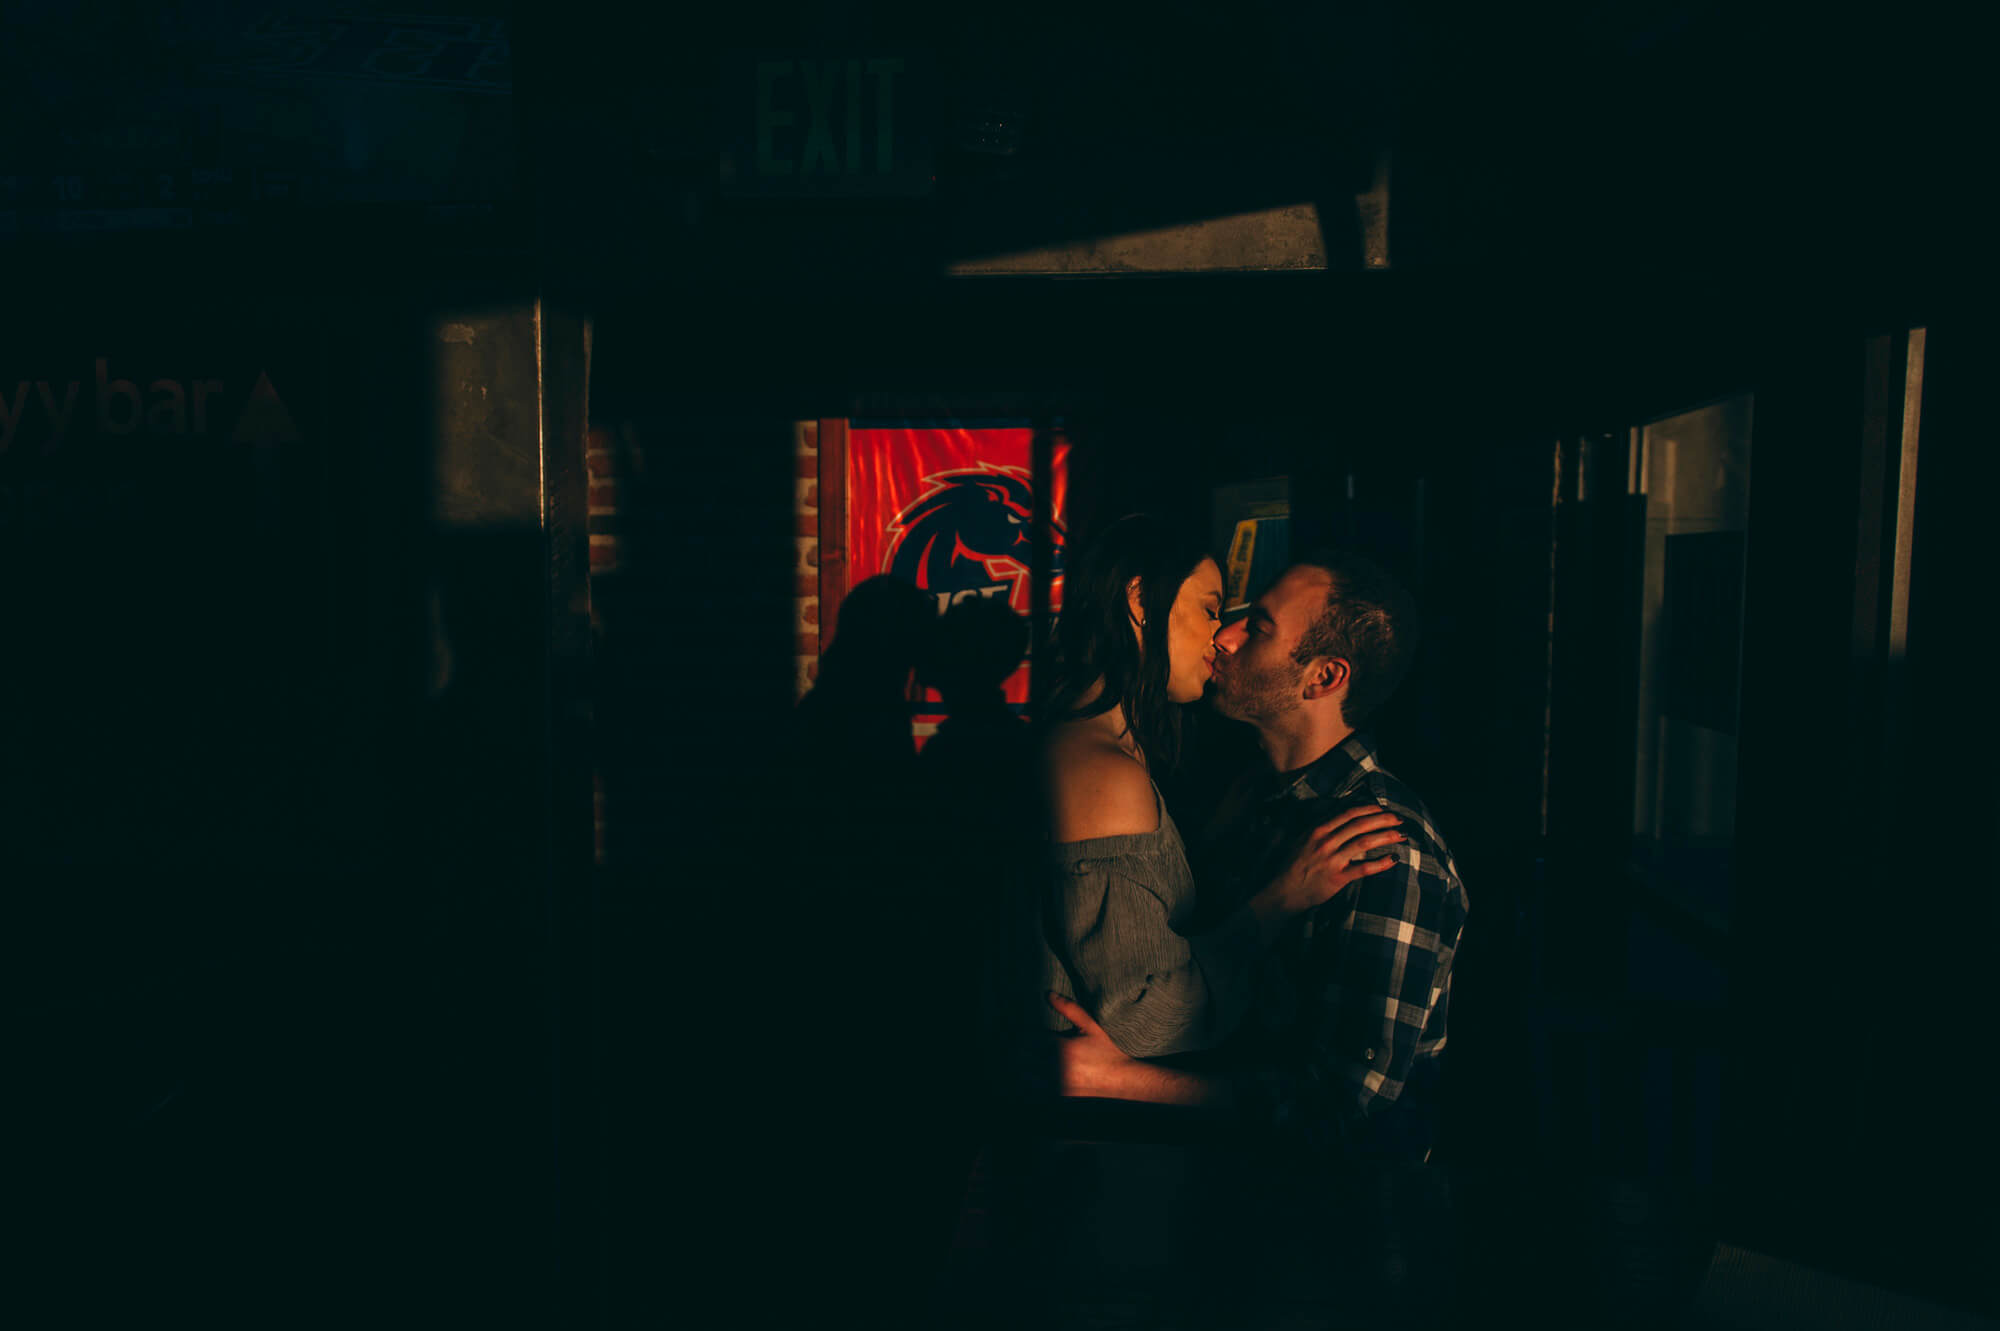 couple kiss at sunset in bar with boise state flag in background